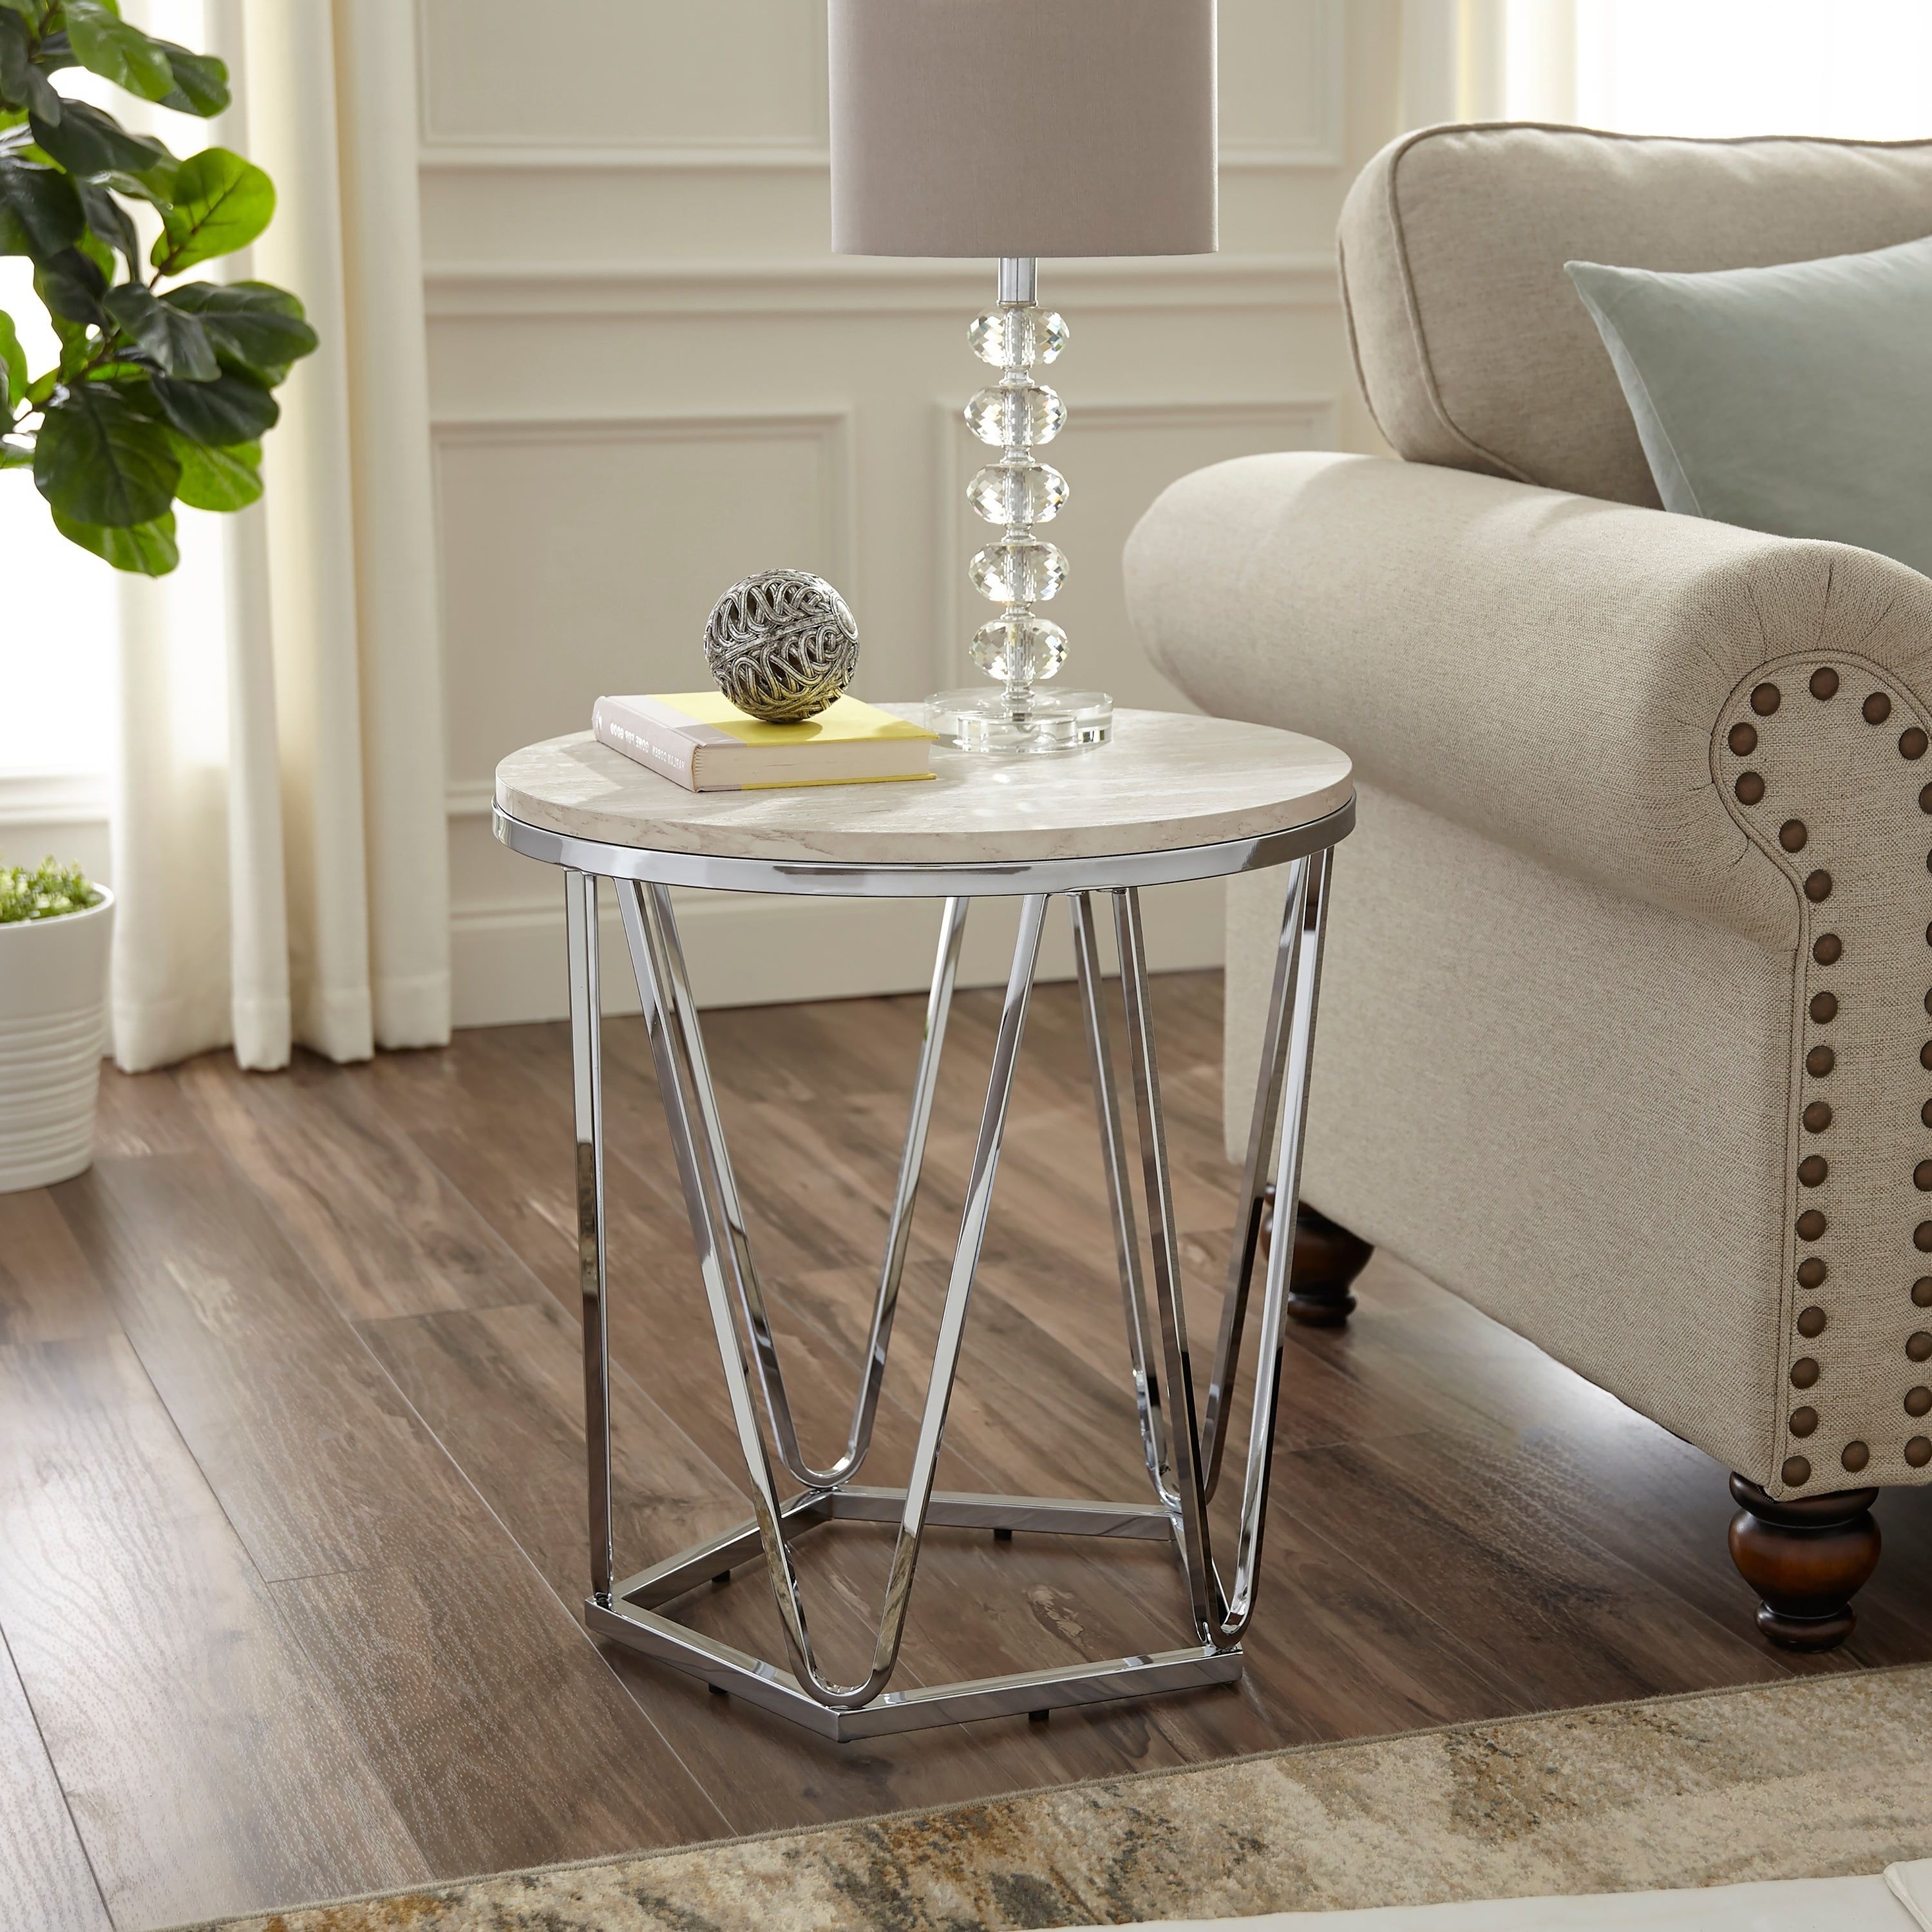 Silver Orchid Henderson Faux Stone Round Side Table In 2020 Silver Orchid Henderson Faux Stone Silvertone Round Coffee Tables (View 8 of 20)